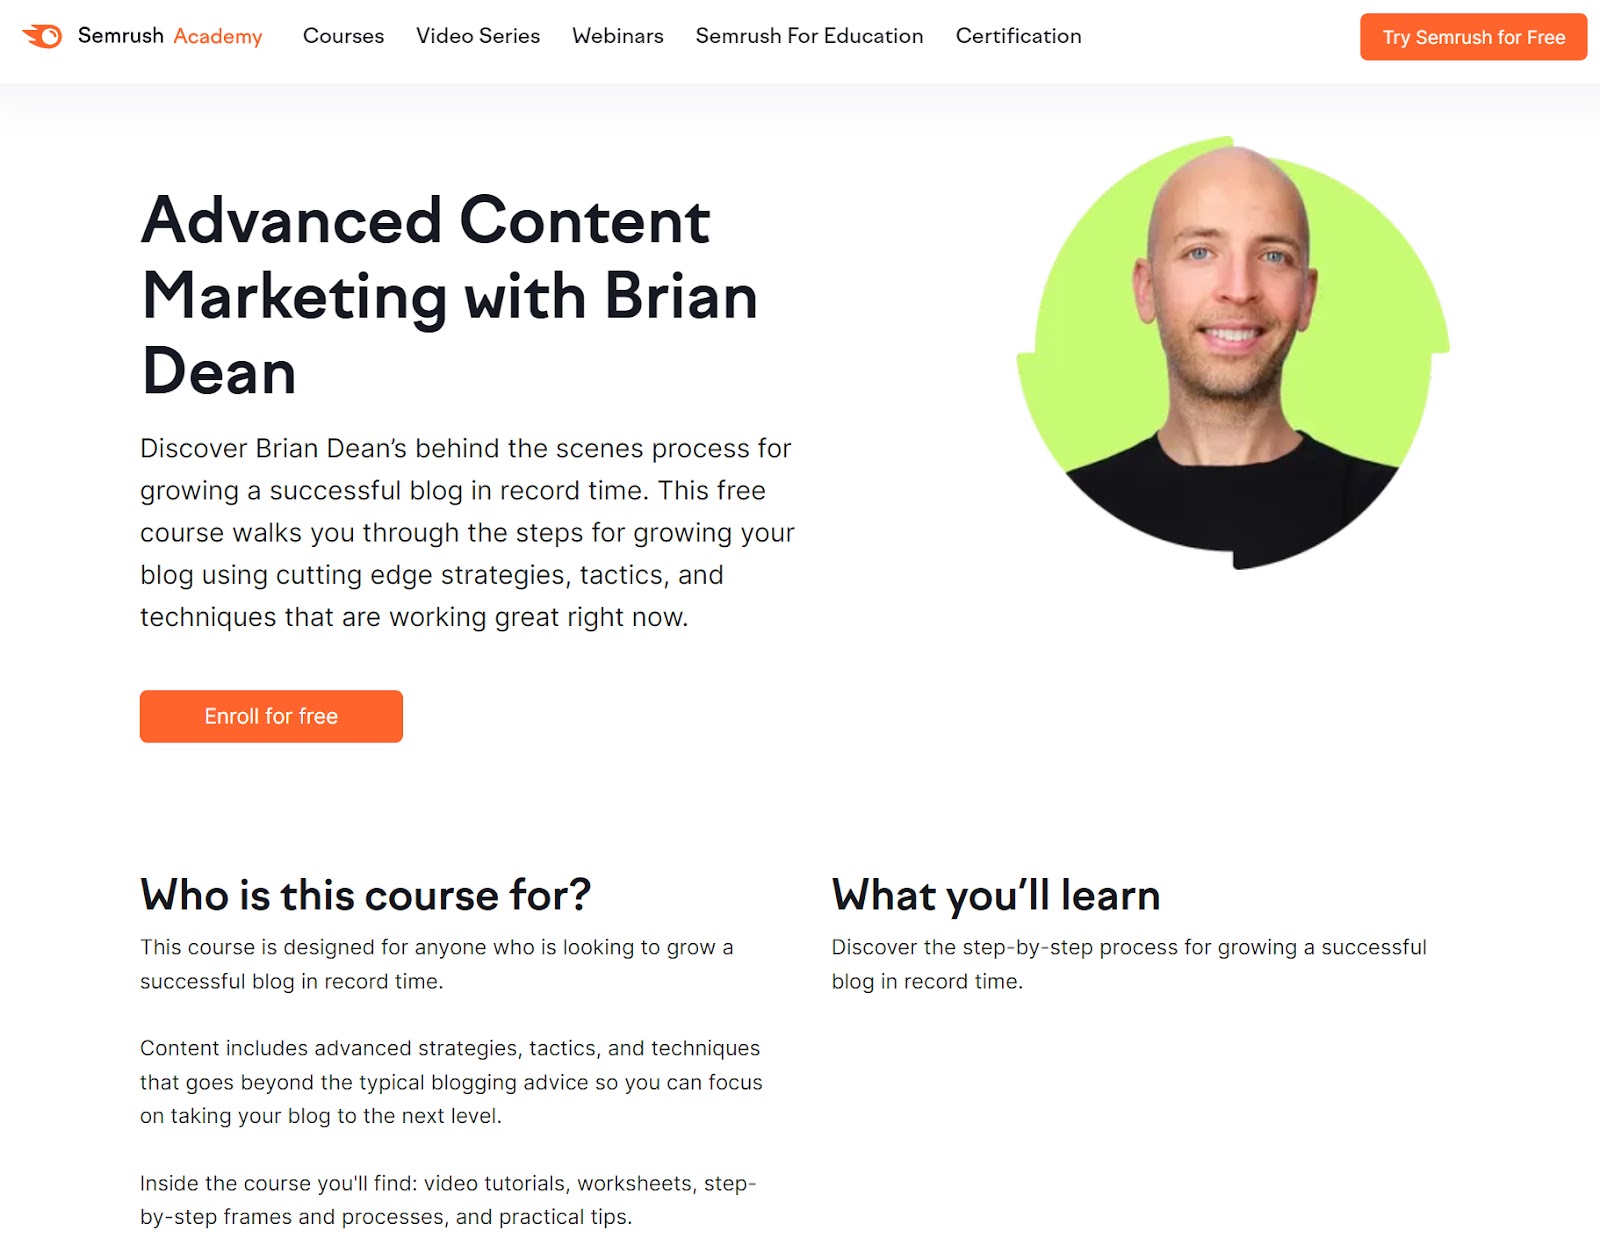 Advanced Content Marketing with Brian Dean landing page